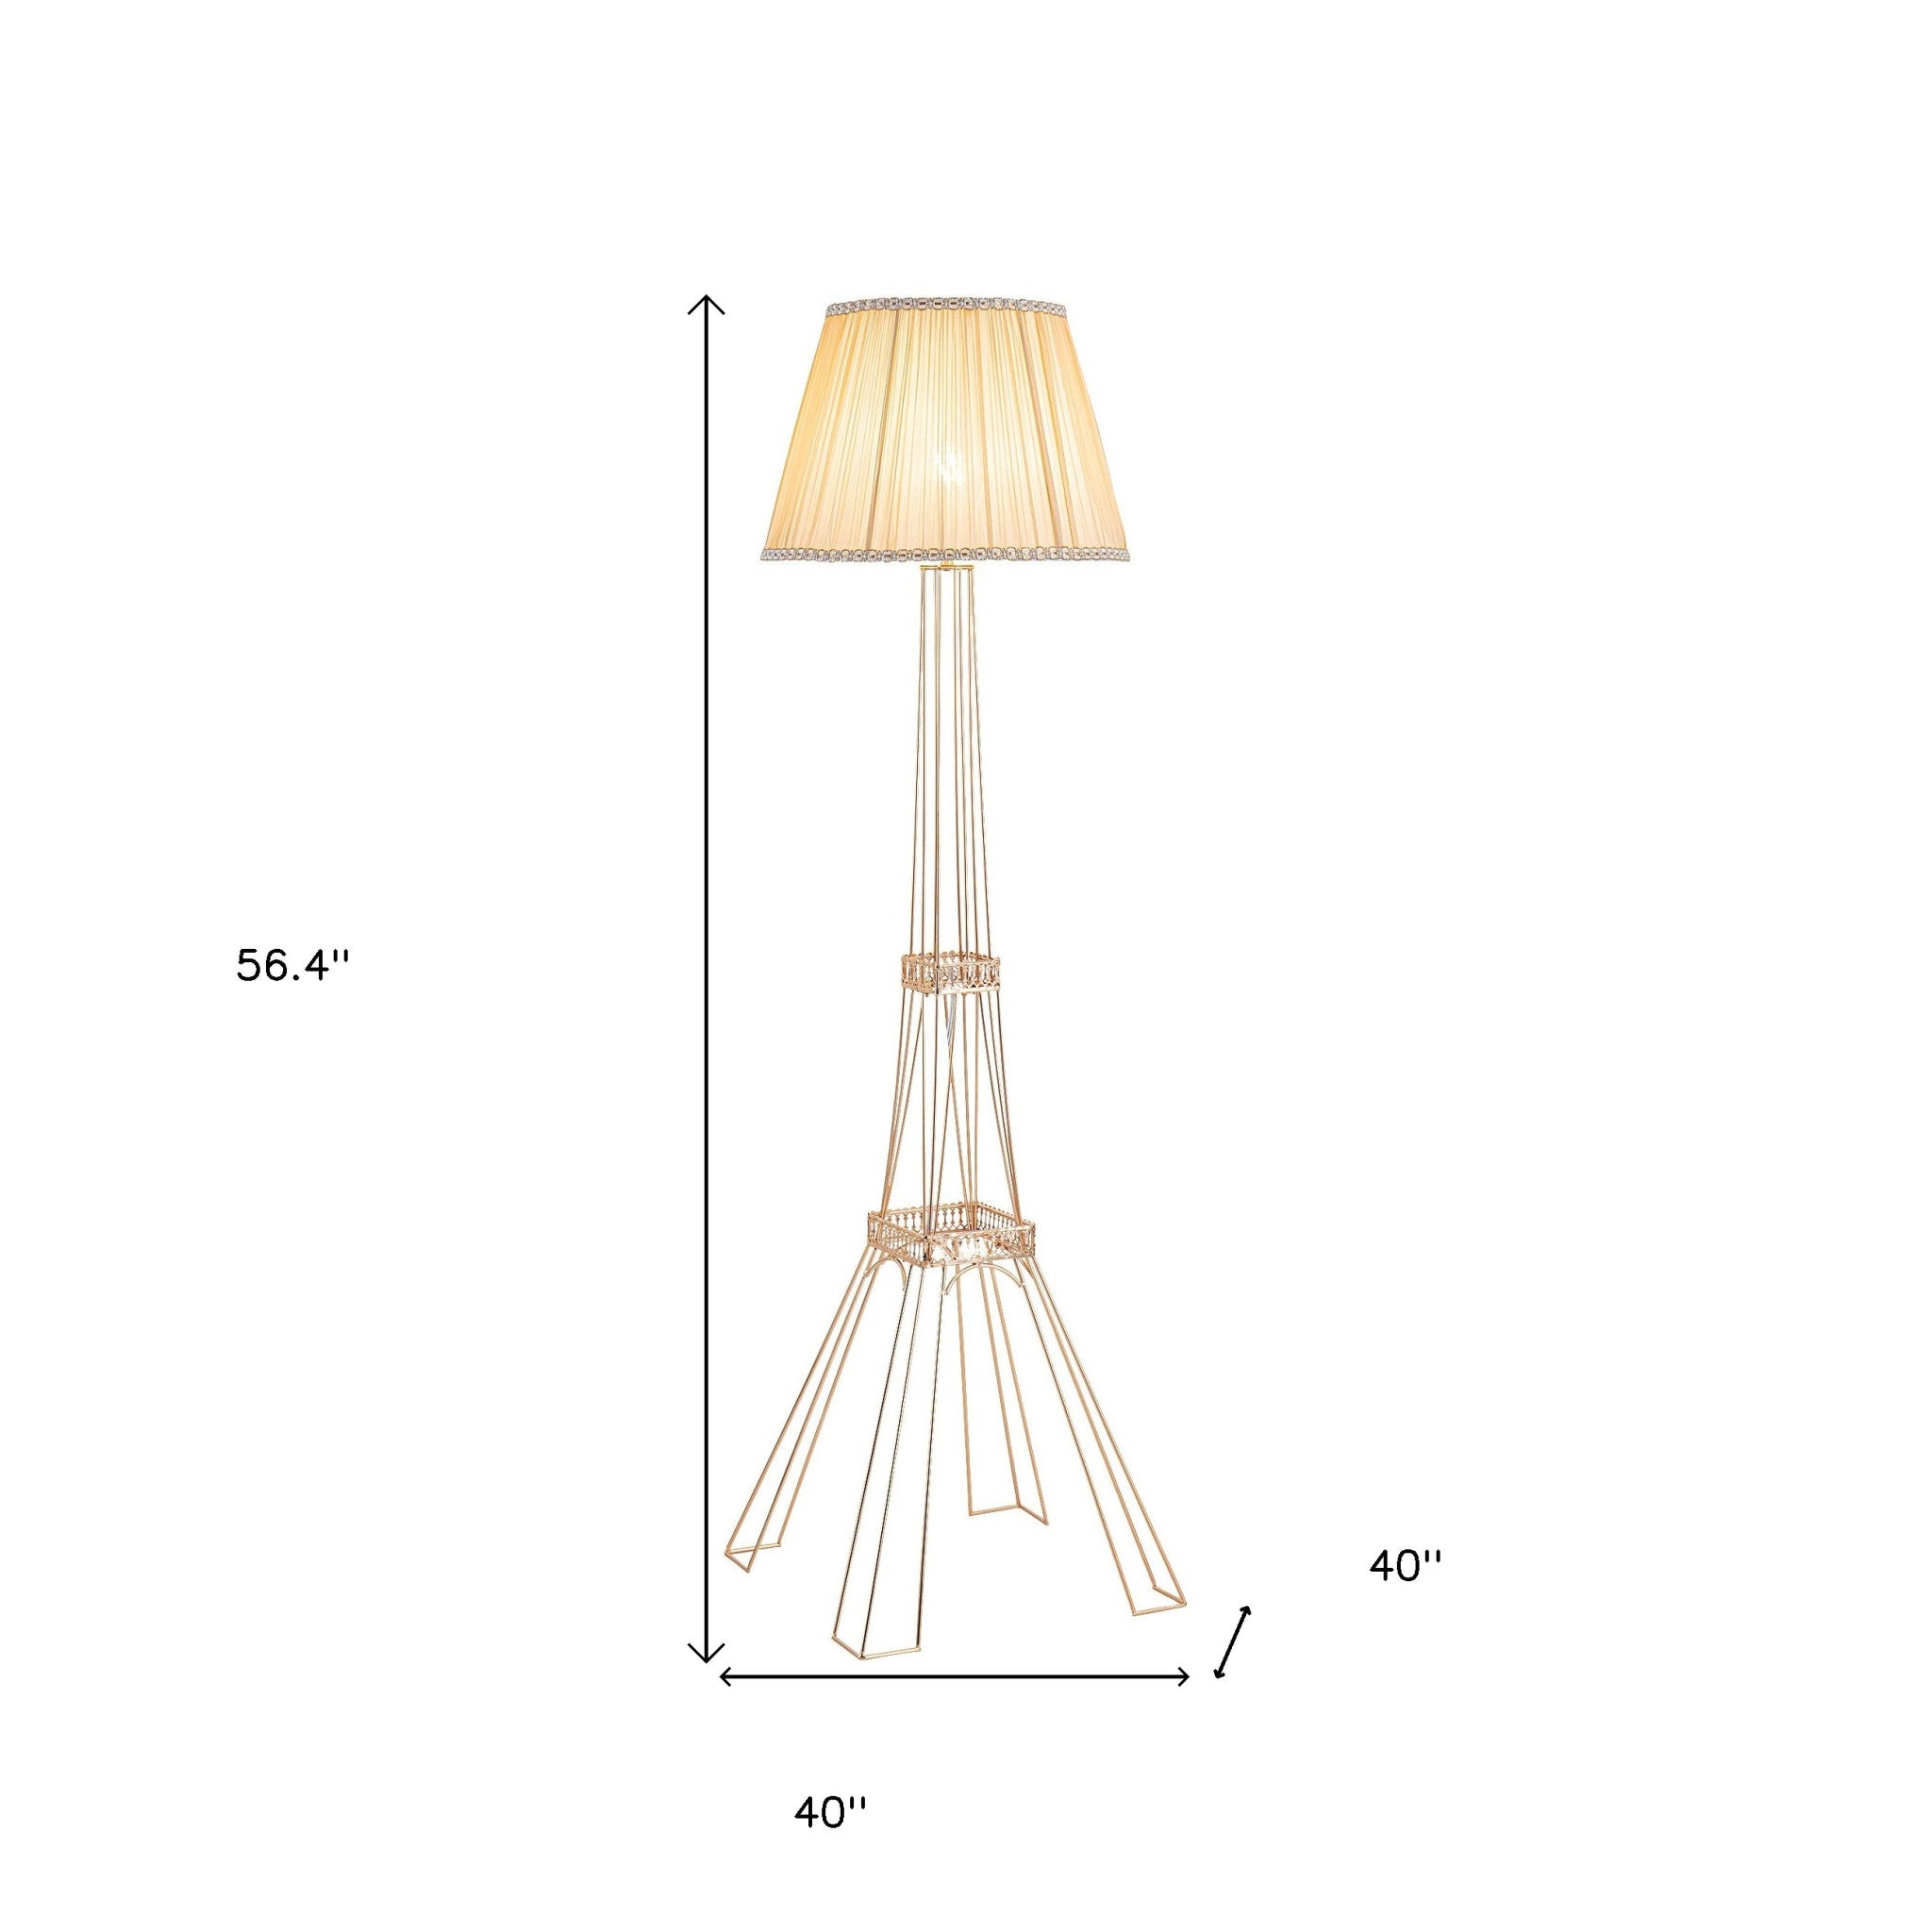 56" Brass LED Light Changing Eiffel Tower Floor Lamp With Ivory Shade